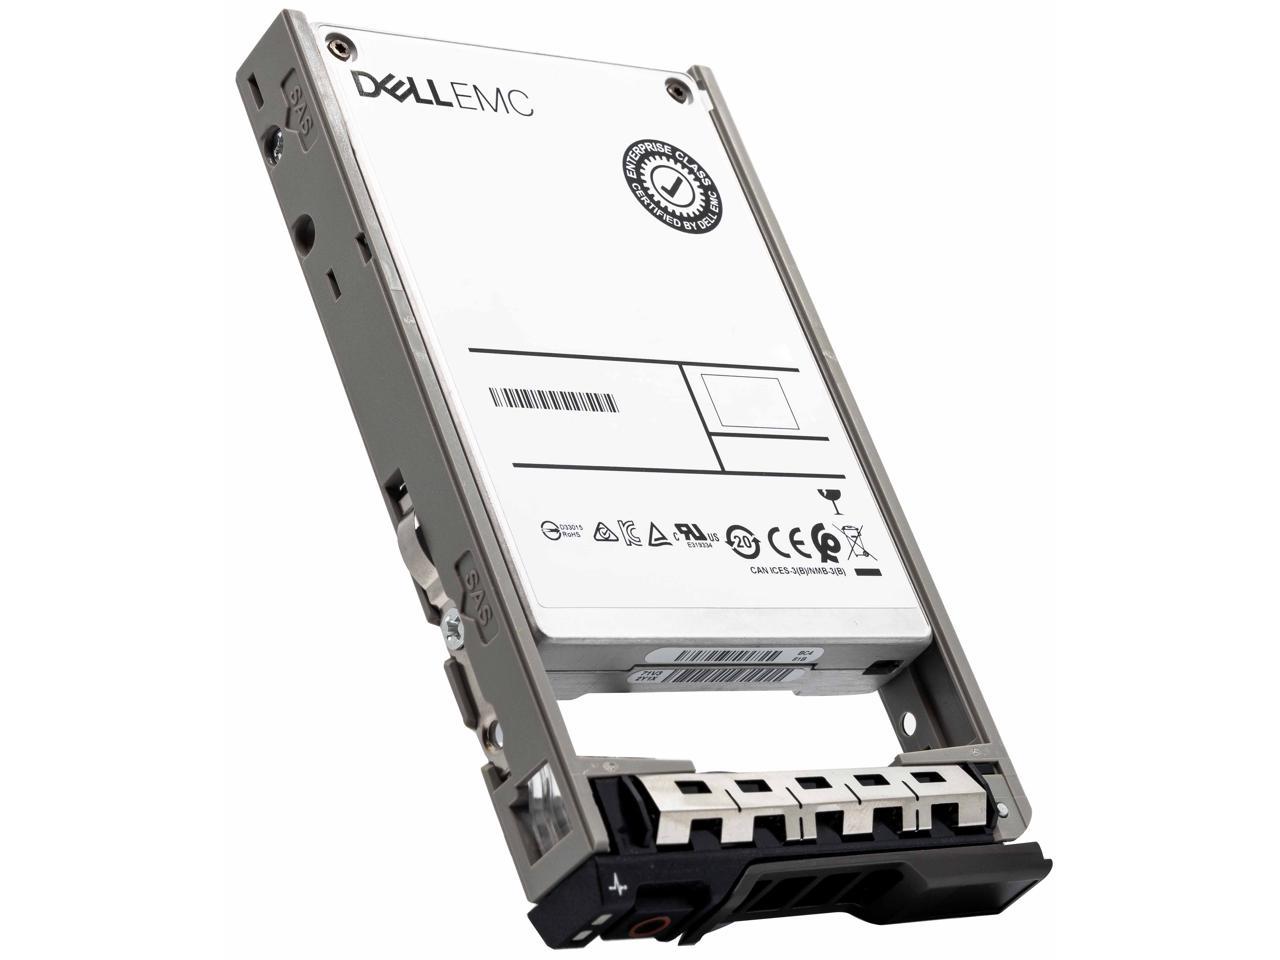 Dell G13 CW988 800GB SAS 12Gb/s 2.5" Solid State Drive